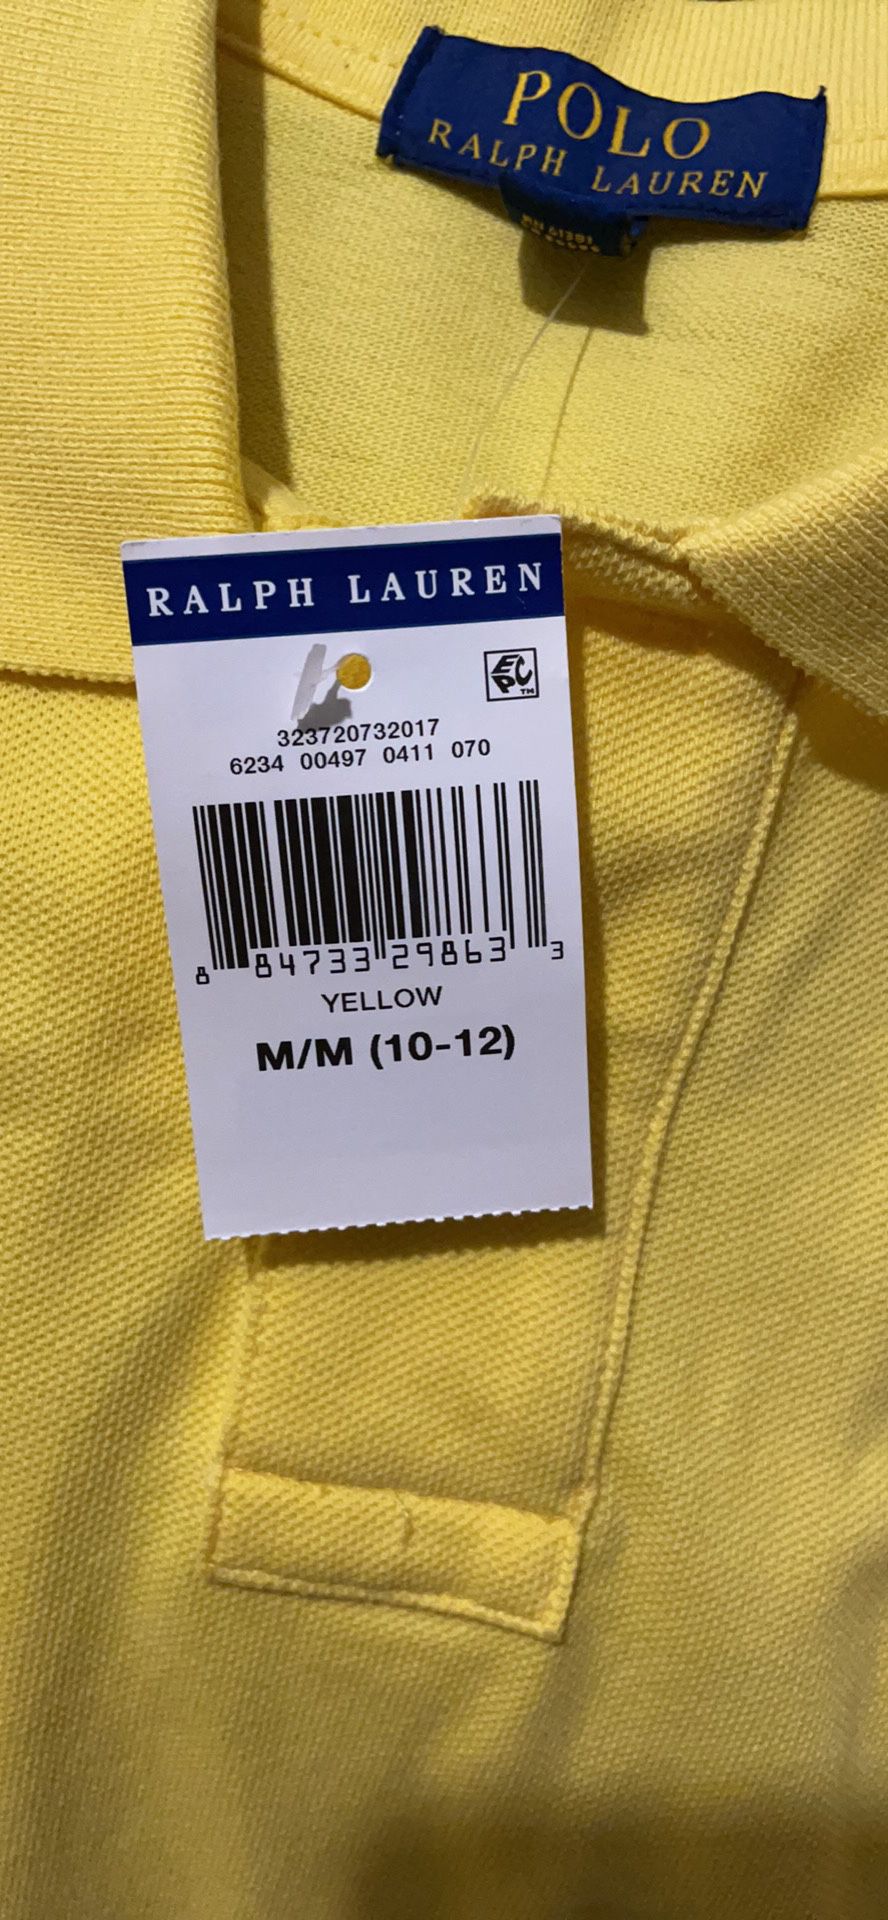 Polo Ralph Lauren Boys Shirt .brand New With Tags .size 10/12 